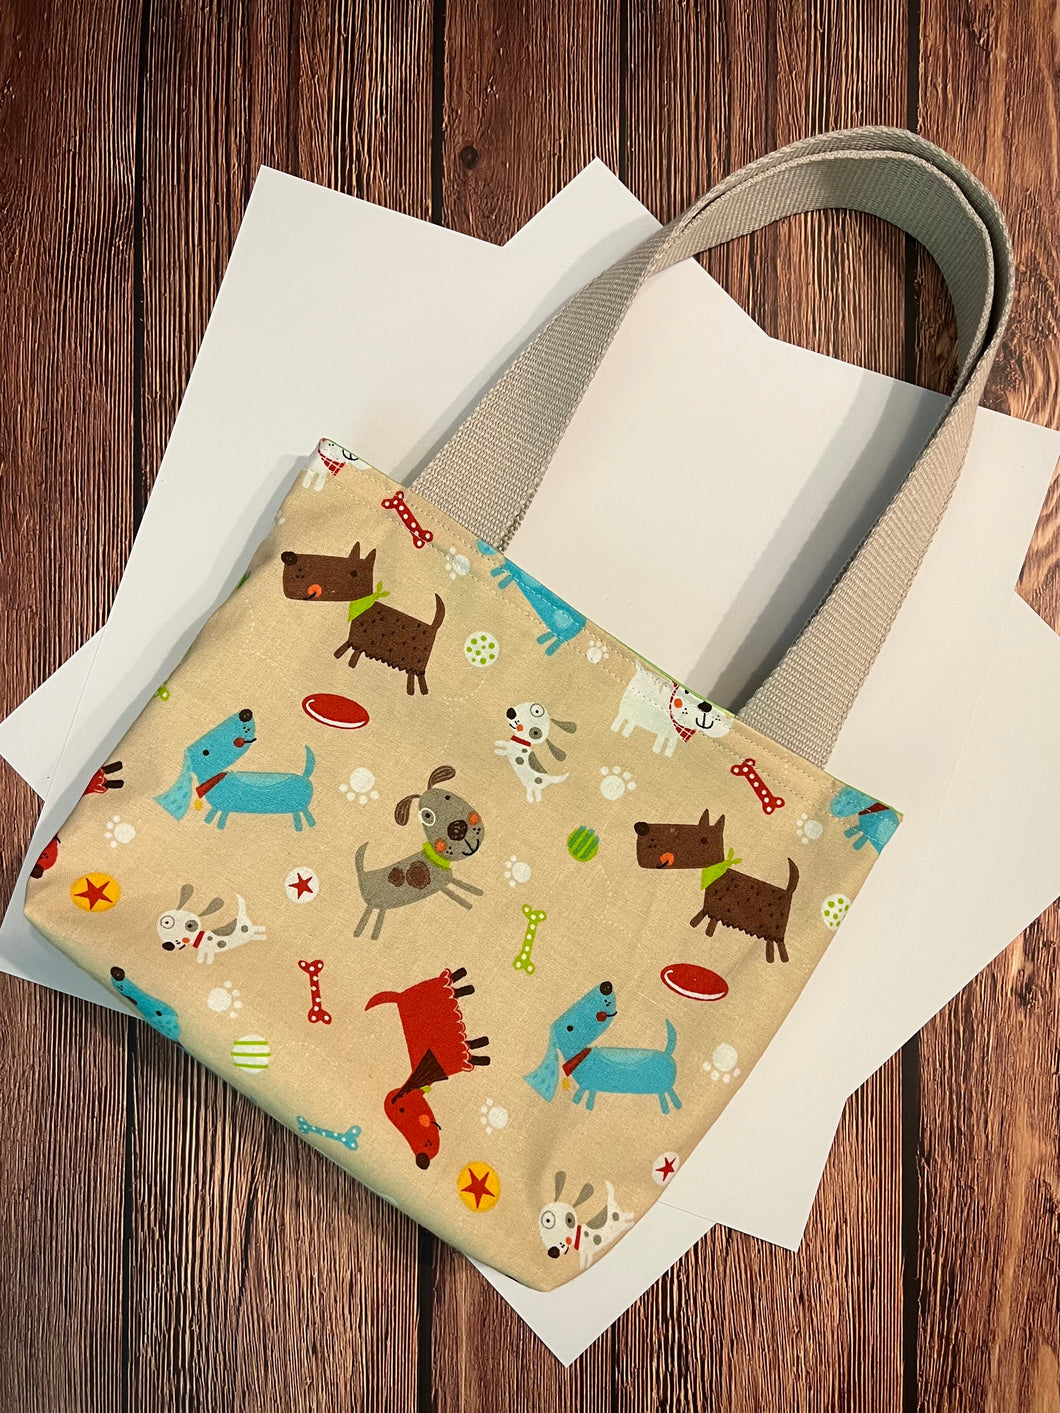 Doggy Fabric Gift Tote Bag